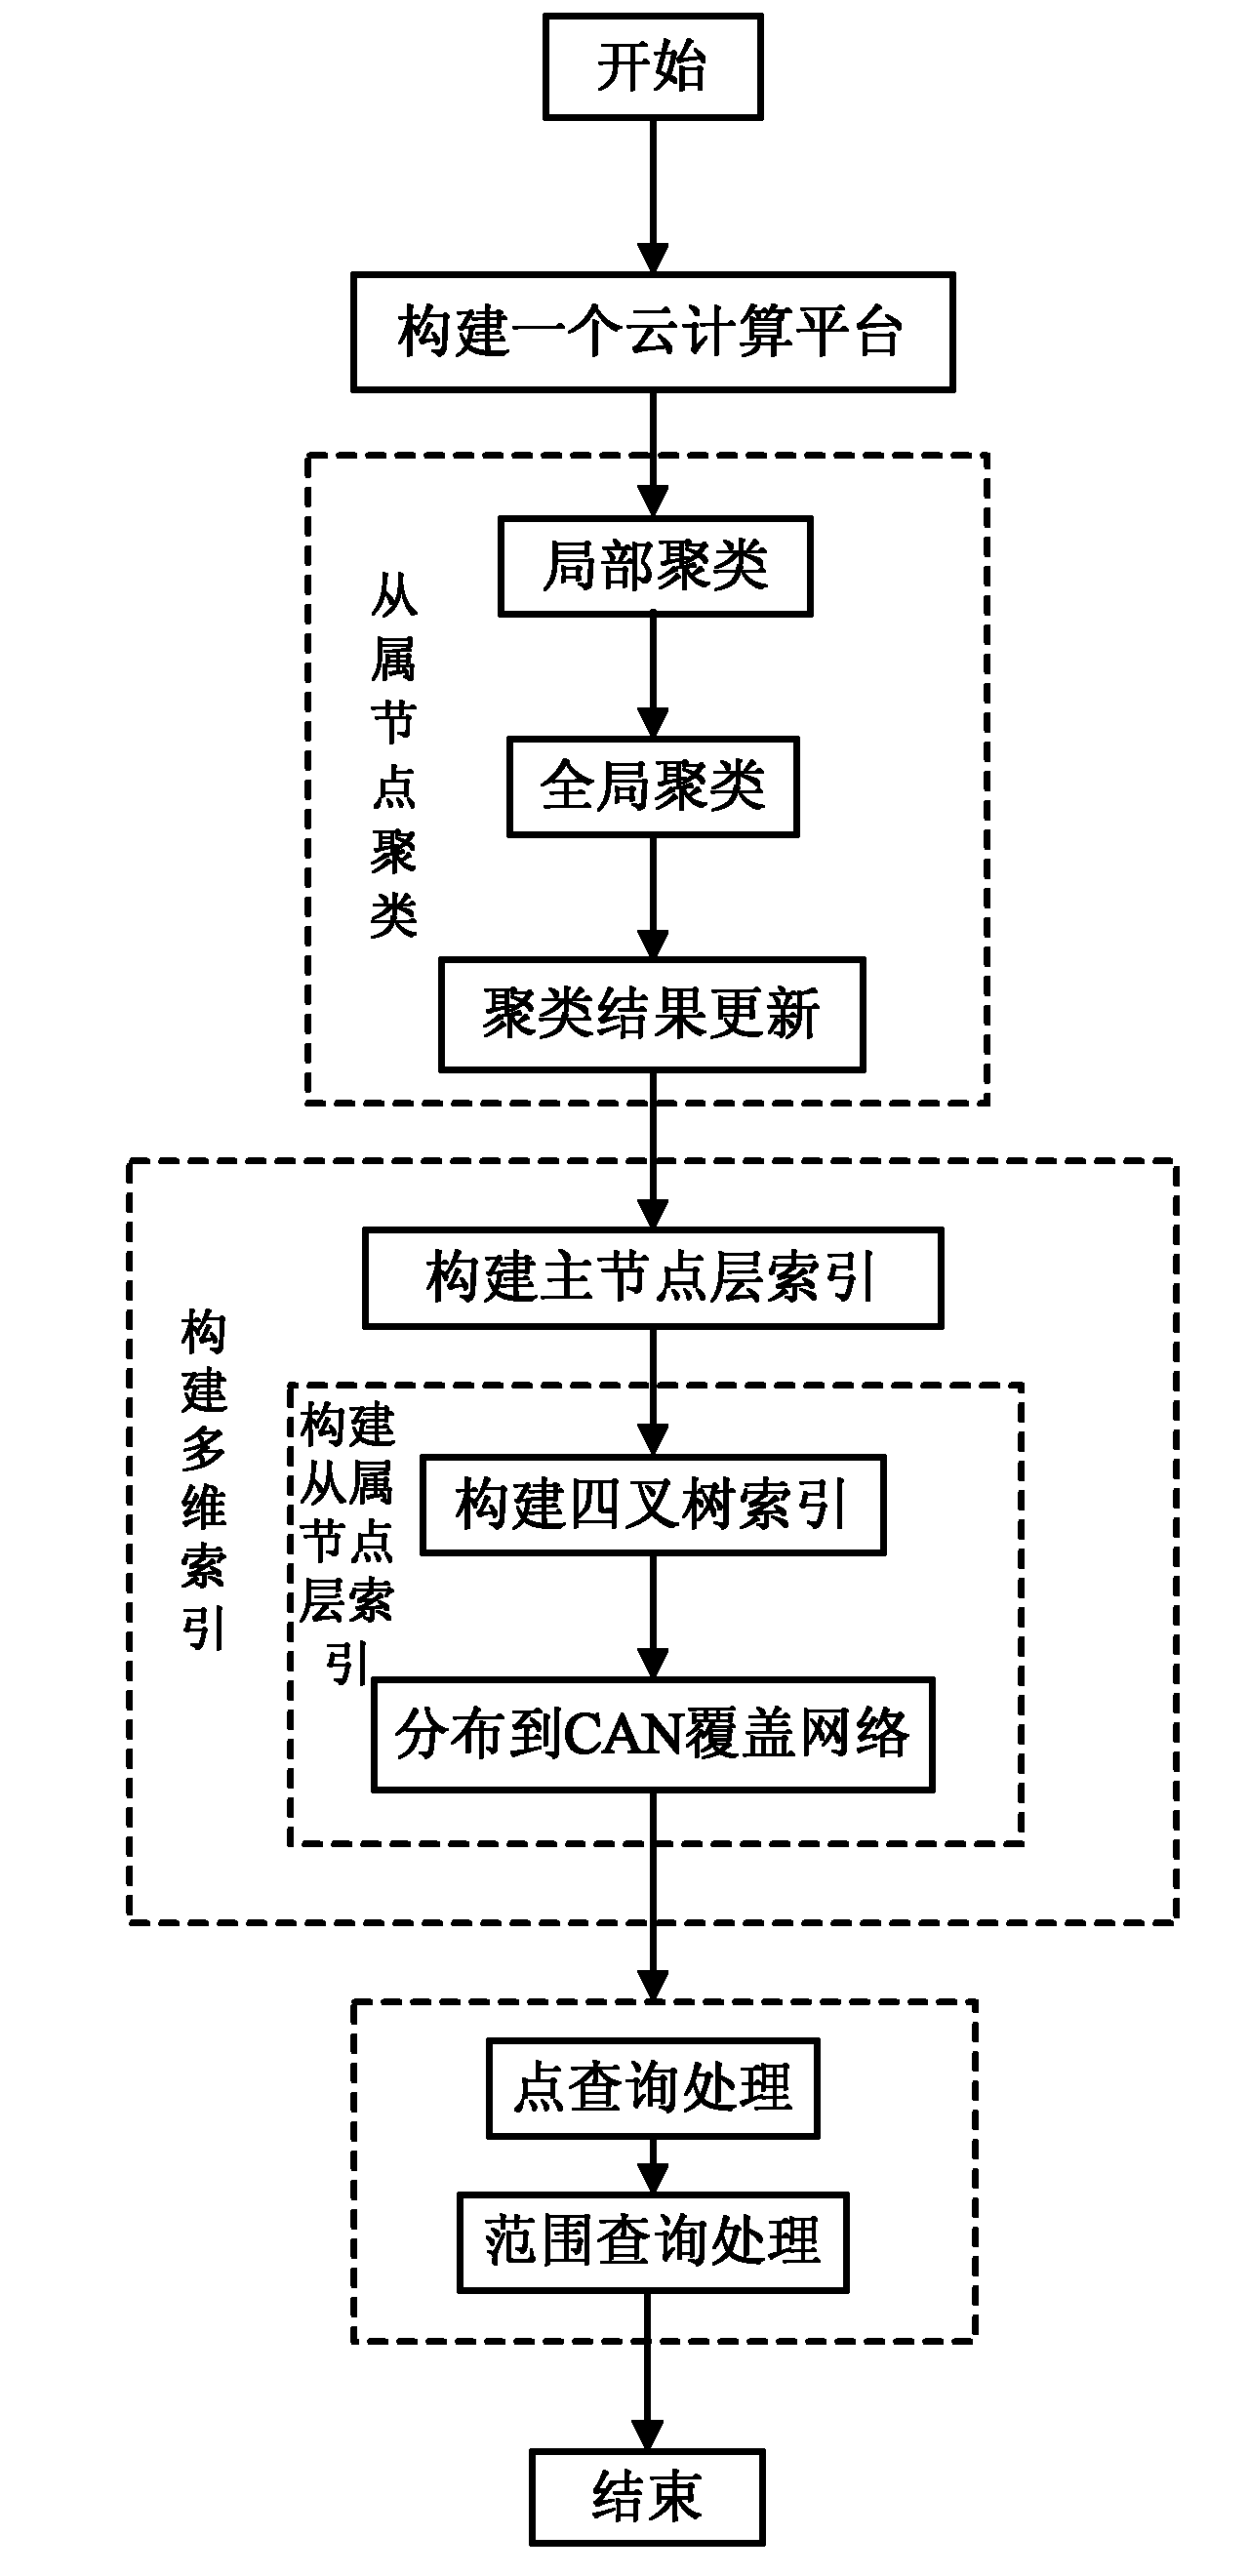 Multi-dimensional data management-oriented cloud computing query processing method